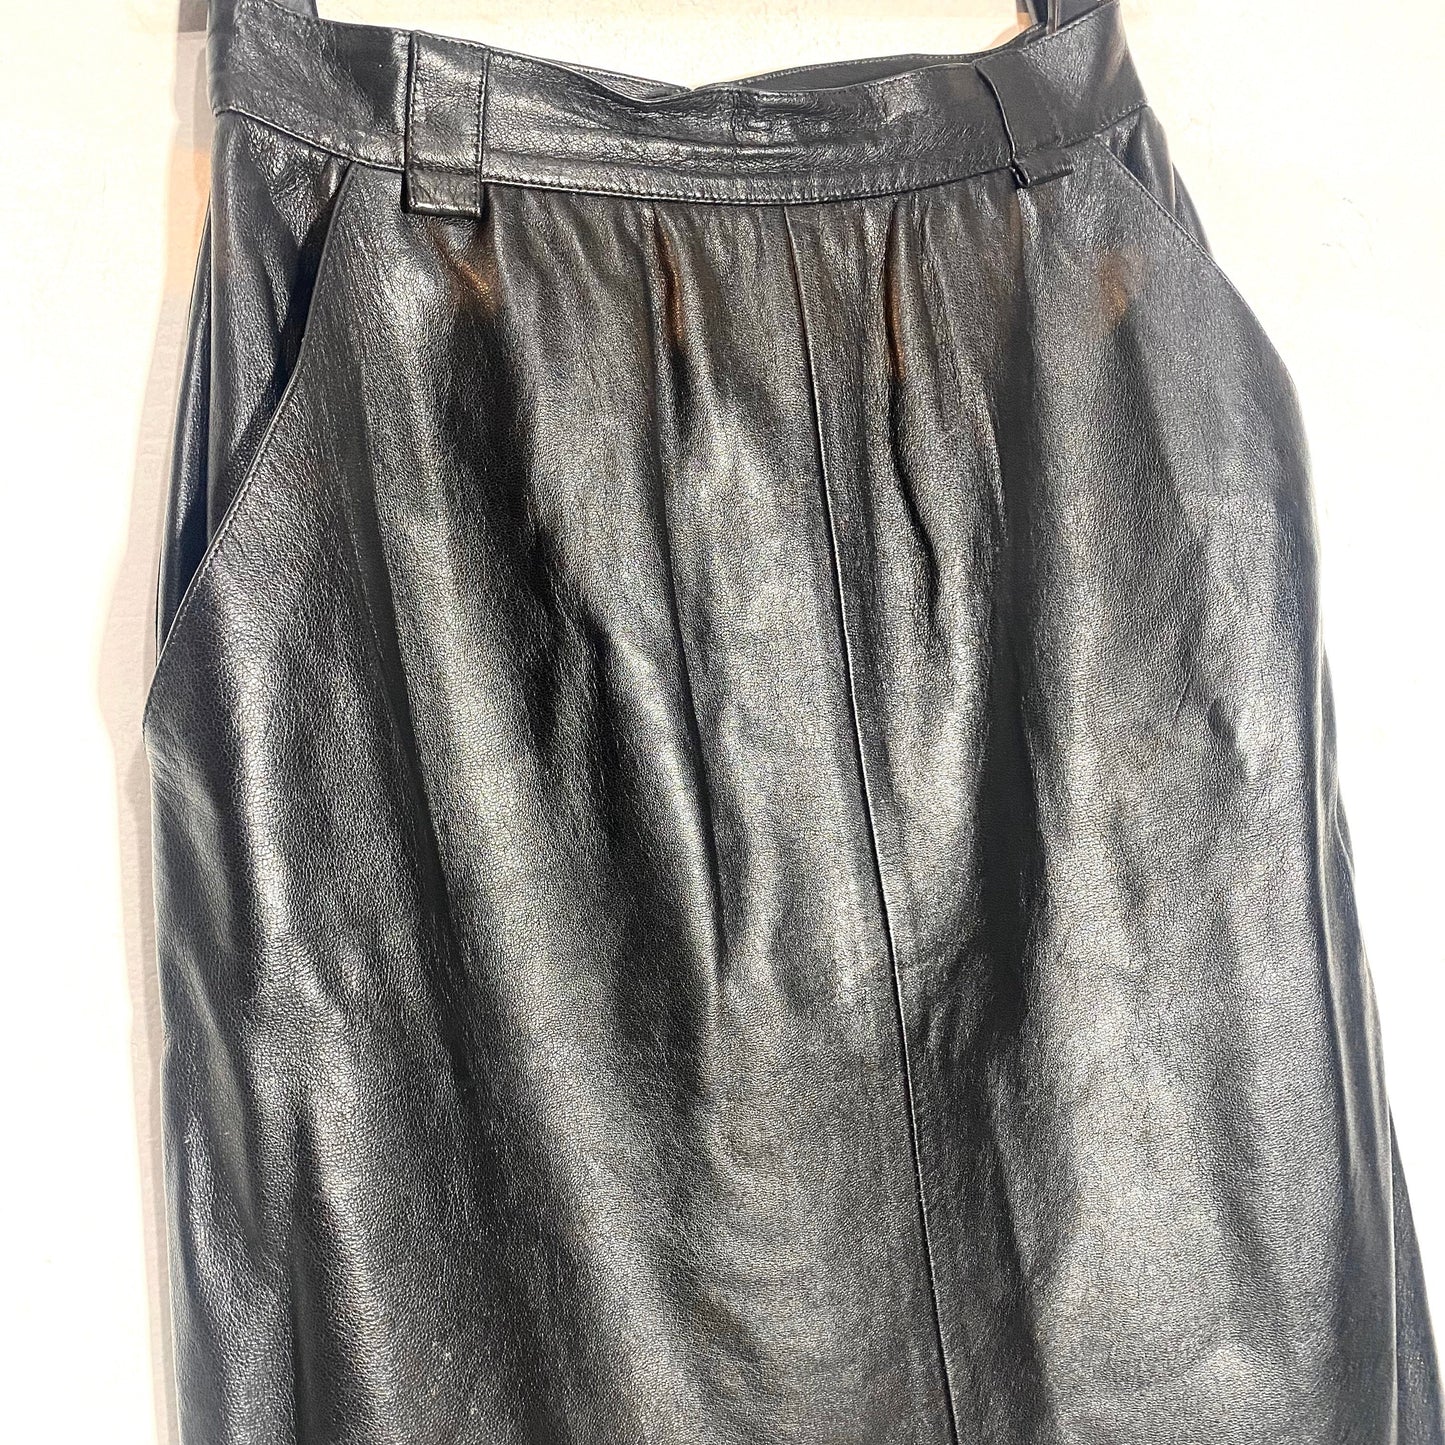 Black lambskin leather pencil skirt with pockets, mint condition 1980s Italy